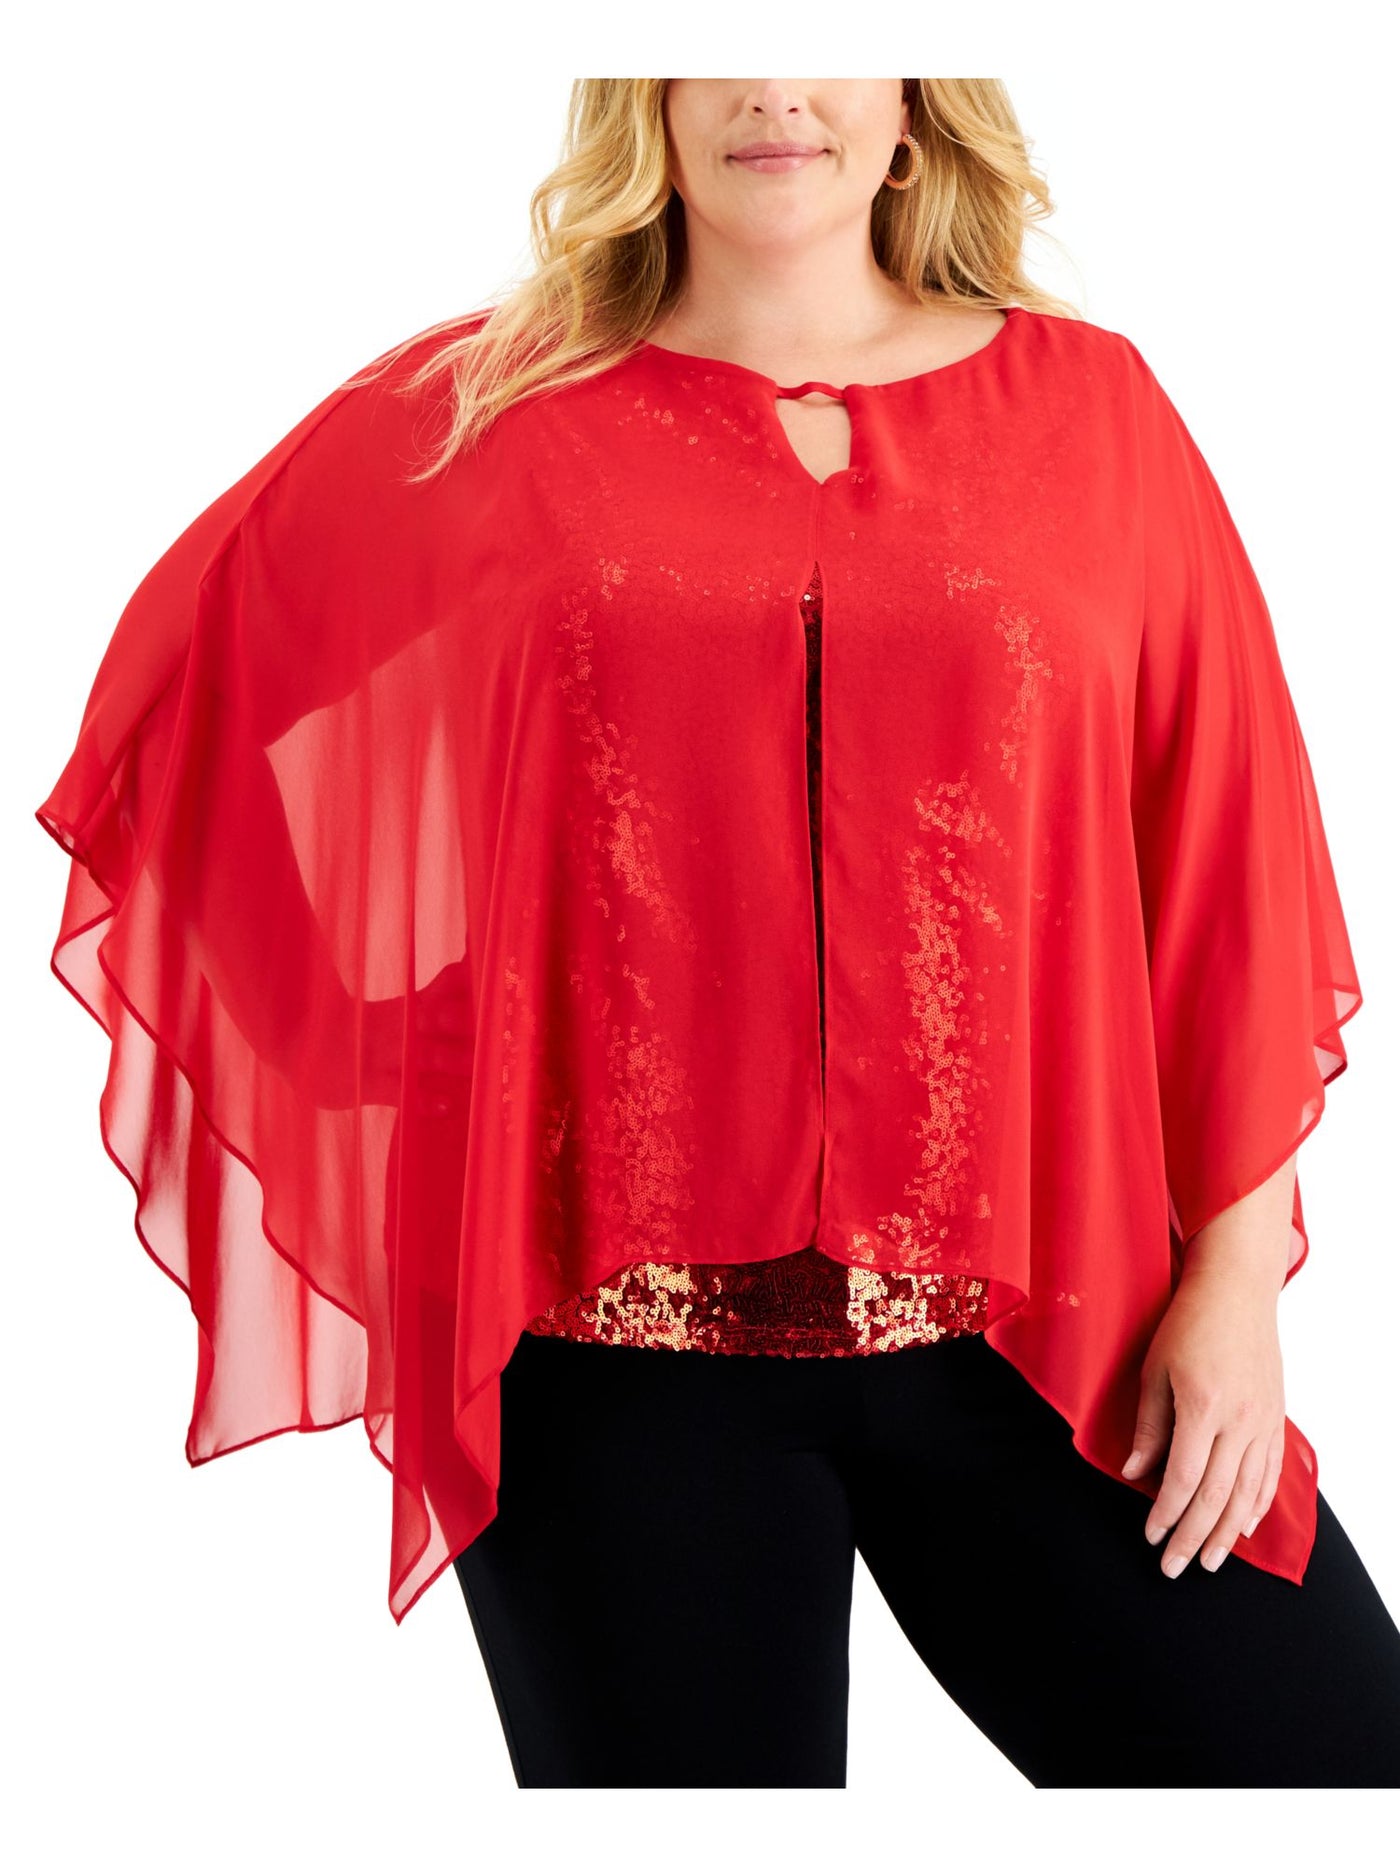 JM COLLECTION Womens Red Sequined Sheer Poncho Overlay Flutter Sleeve Keyhole Party Top Plus 3X